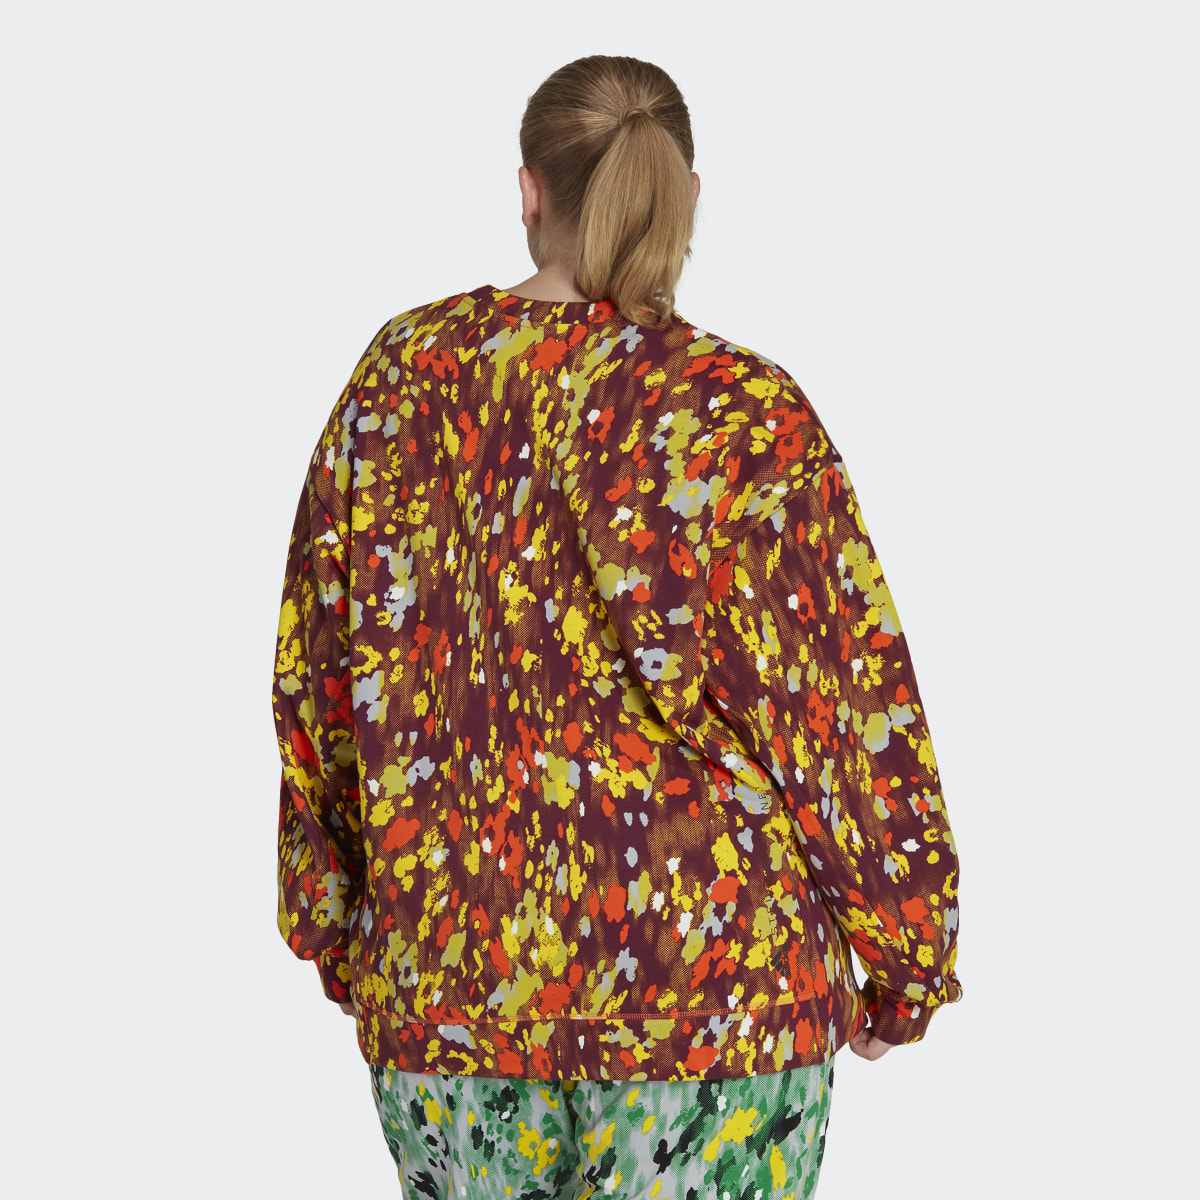 Adidas Sweat-shirt graphique adidas by Stella McCartney (Grandes tailles). 3